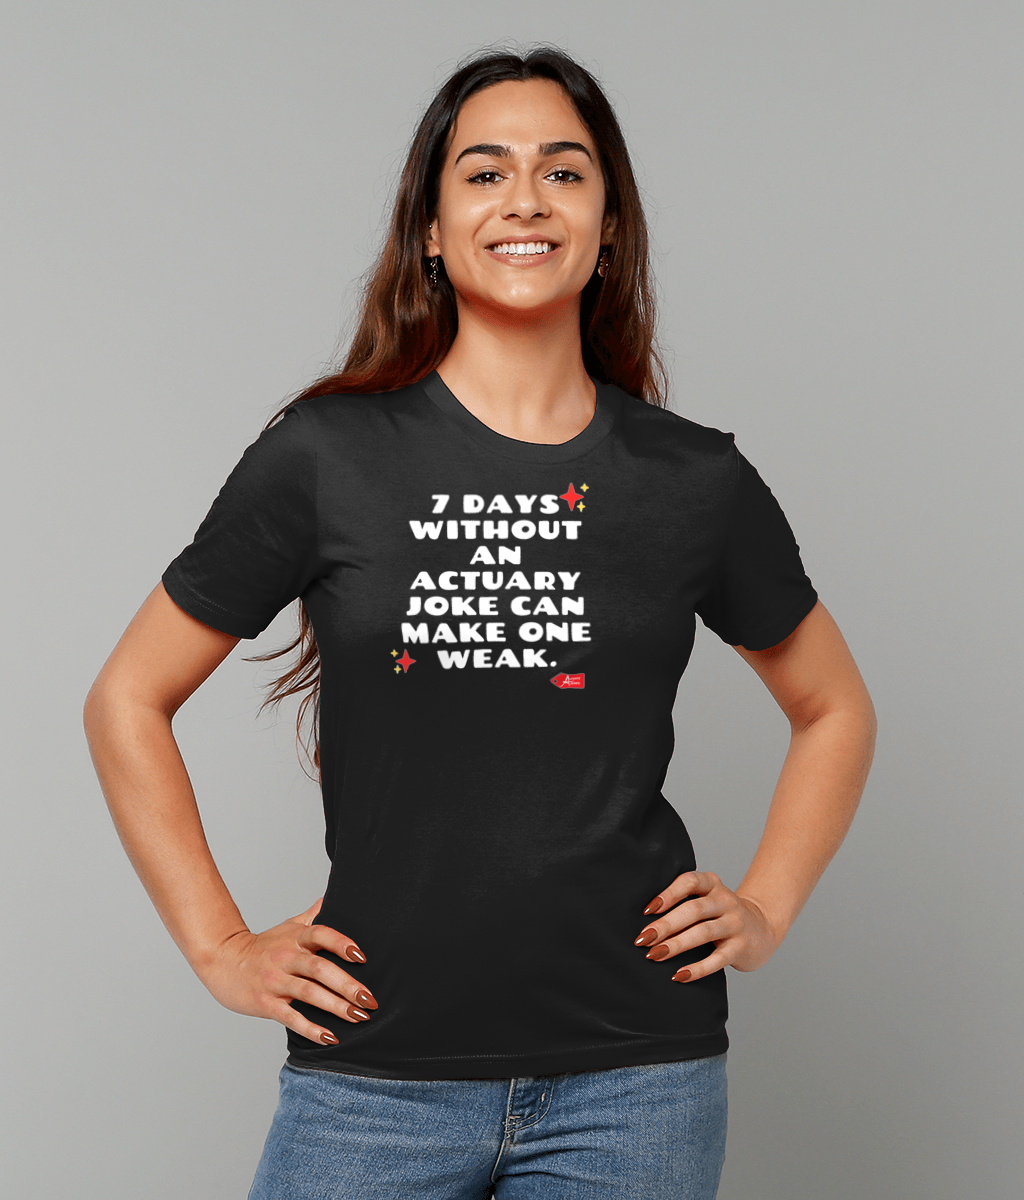 7 Days Without An Actuary Joke Can Make One Weak T-Shirt